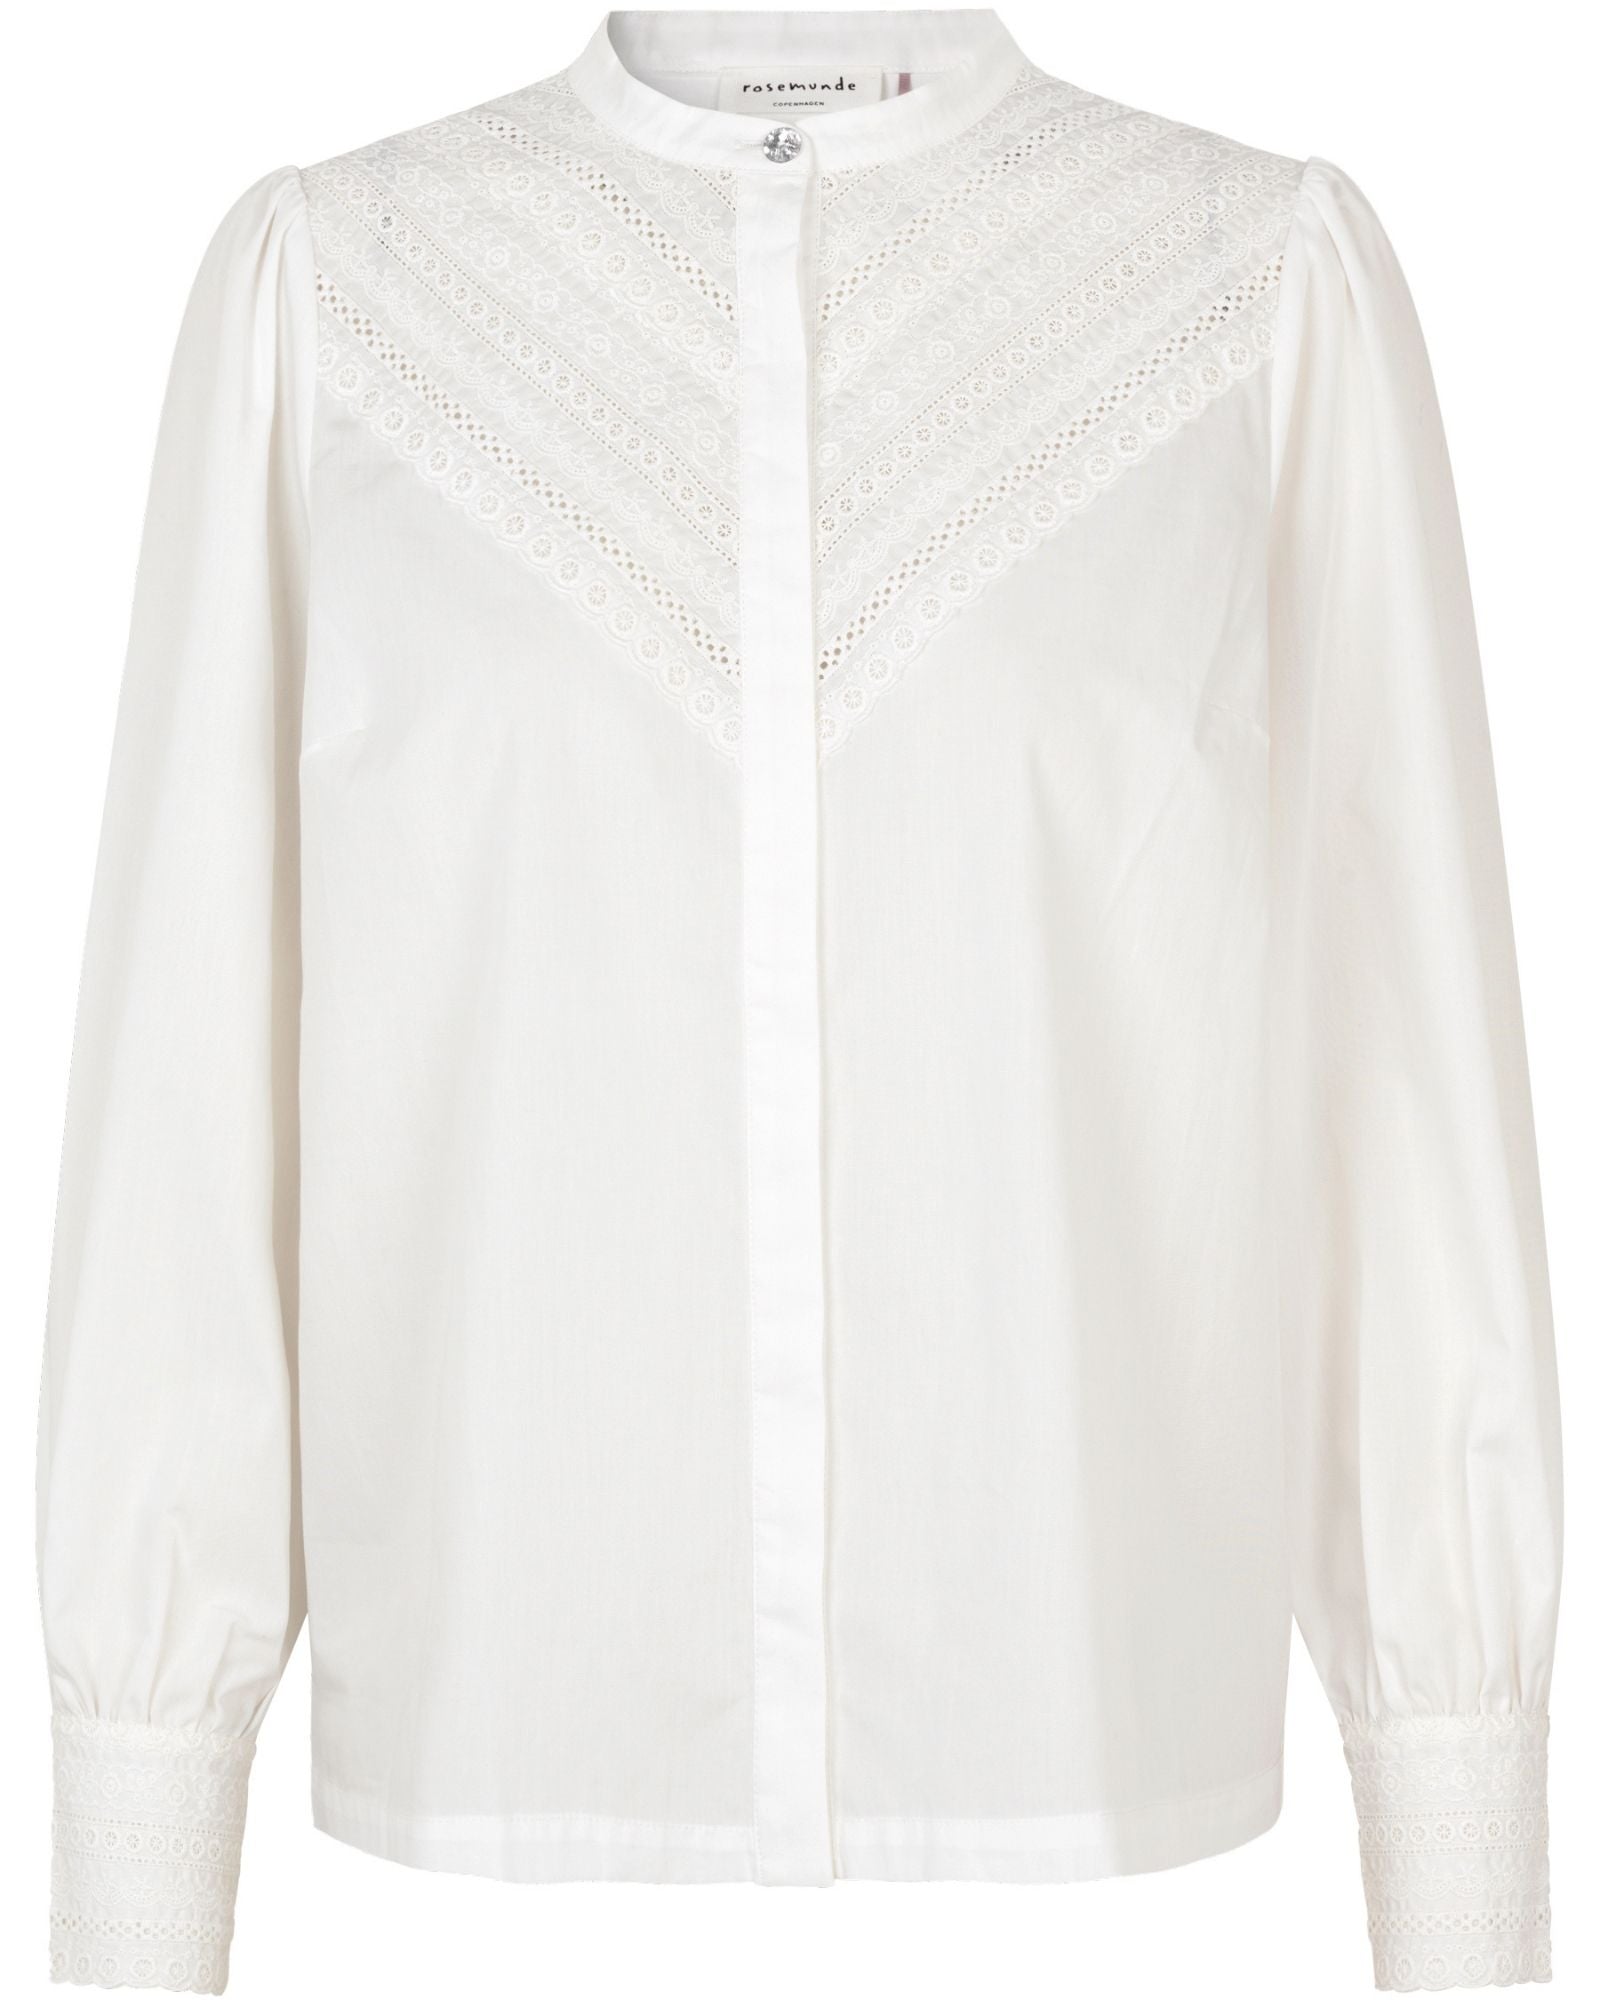 Shop Broderie Angalise Button Through Blouse in White Organic Cotton - Rosemunde Front